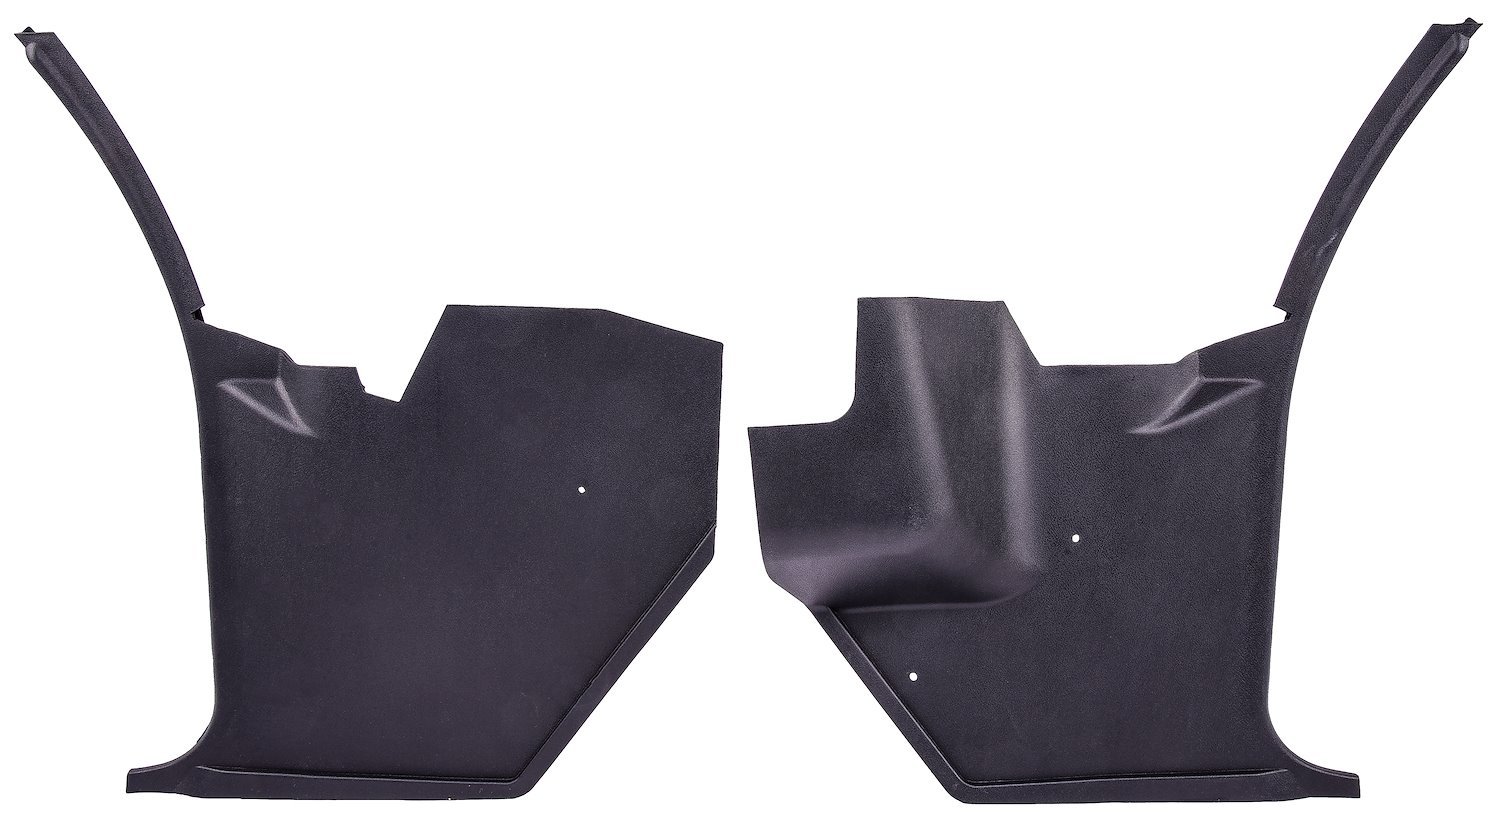 Interior Kick Panels Fits Select 1968-1972 Chevrolet, Buick, Oldsmobile, Pontiac Models [With A/C]